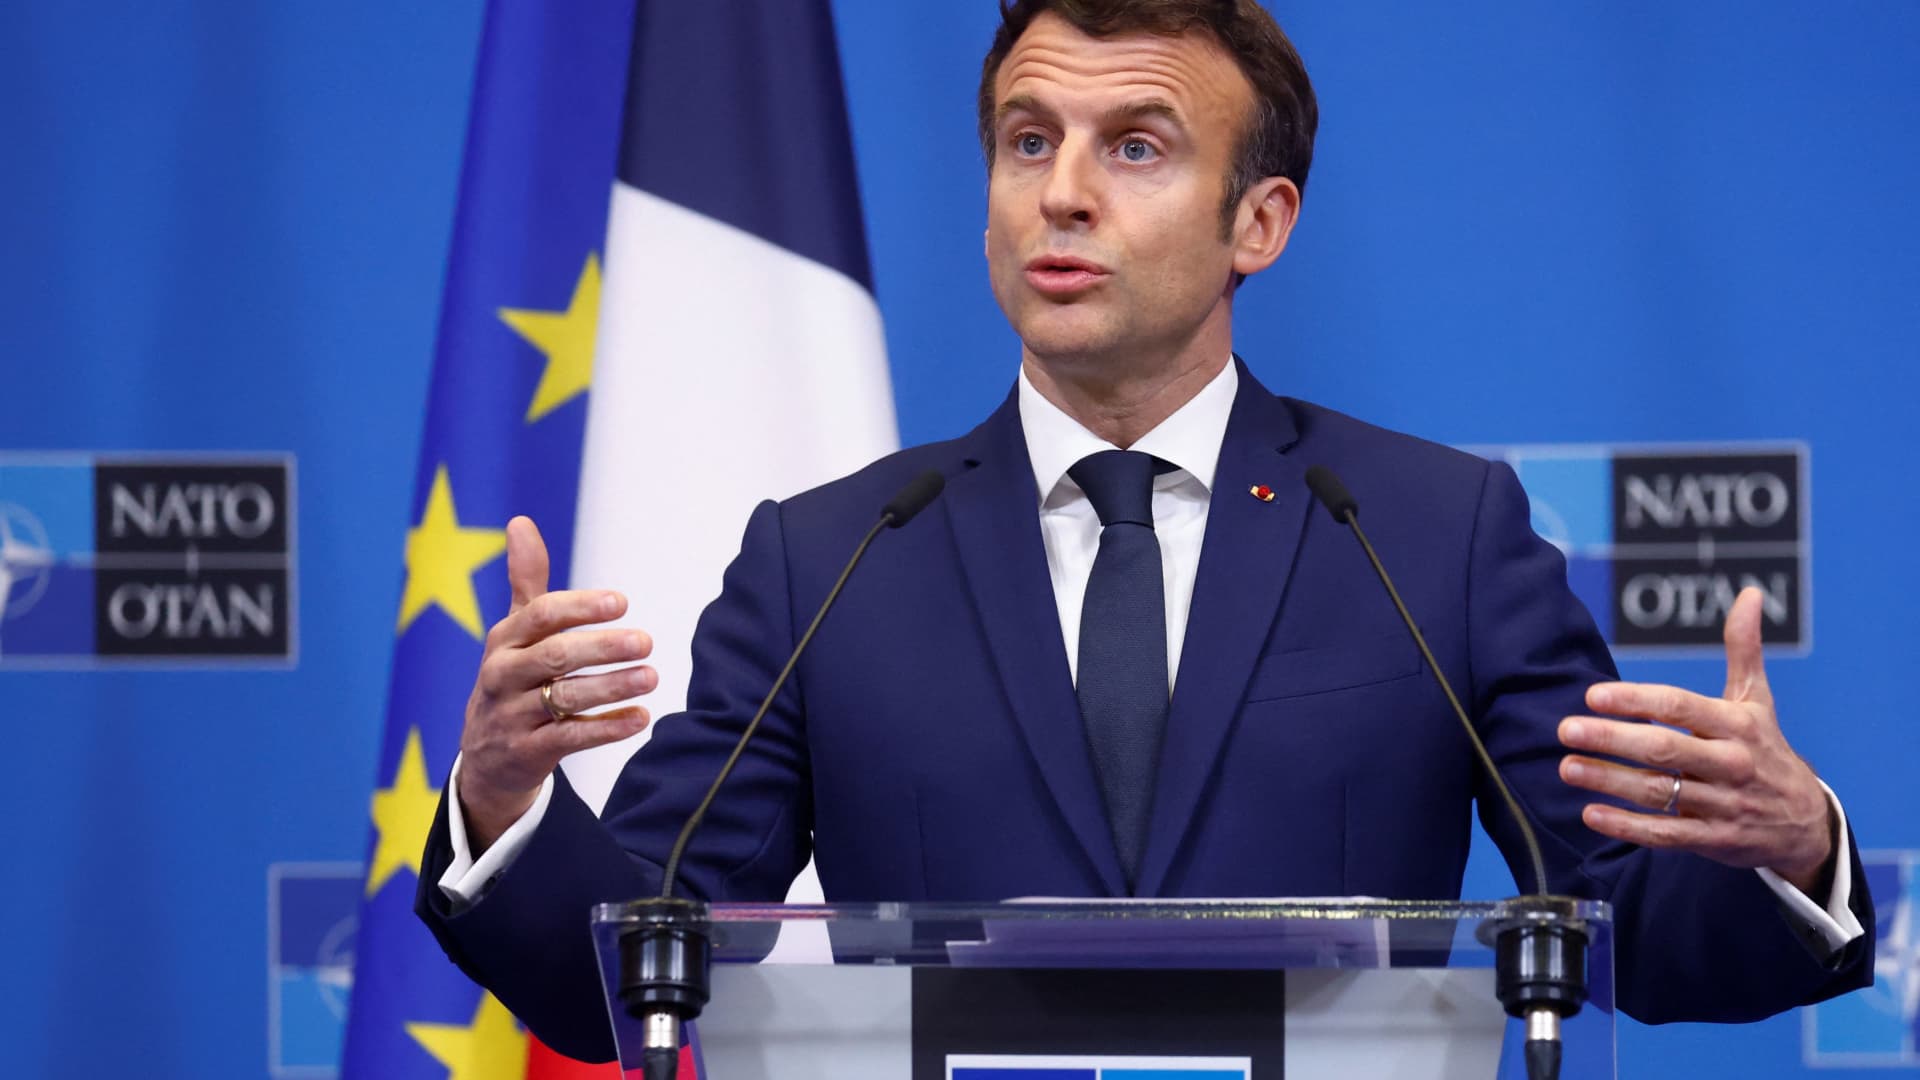 French President Emmanuel Macron speaks during a news conference following a NATO summit, in Brussels, Belgium, March 24, 2022.